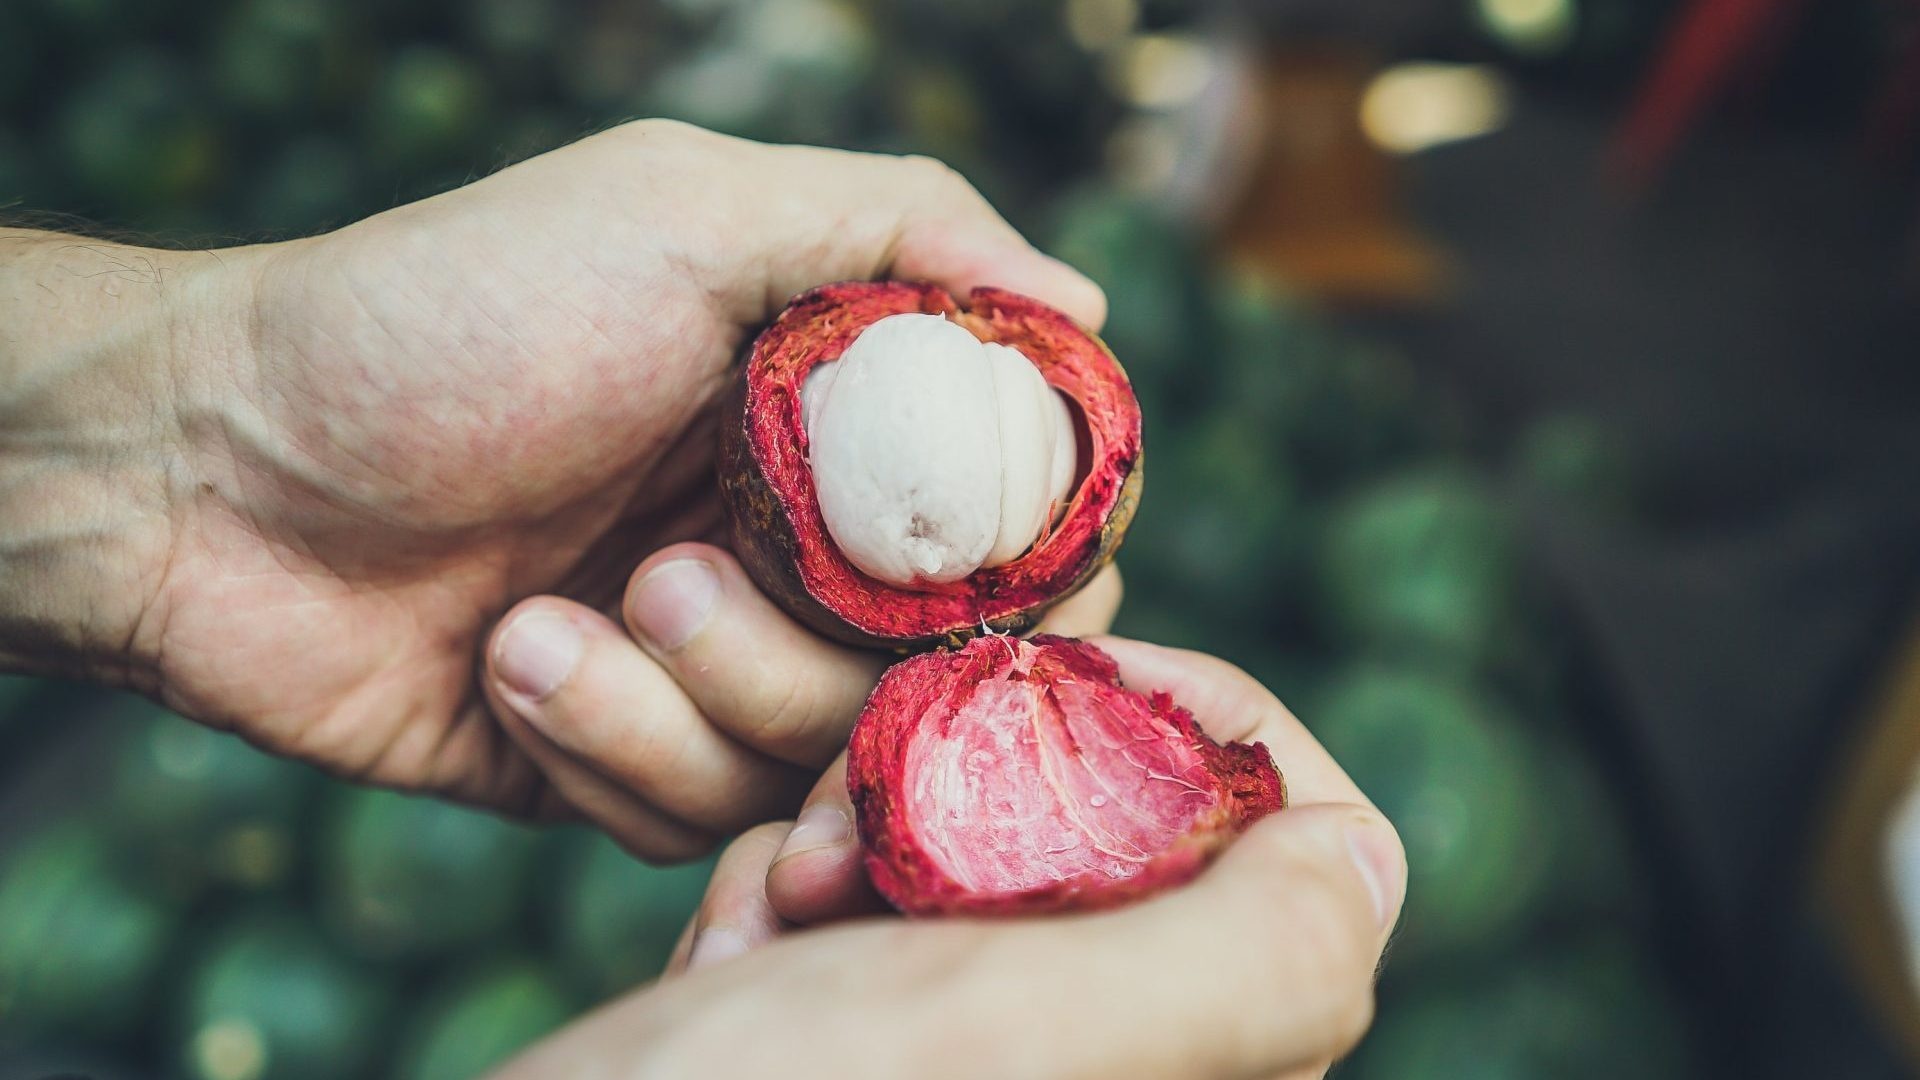 Mangosteen: The edible endocarp of the has the same shape and size as a tangerine. 1920x1080 Full HD Wallpaper.